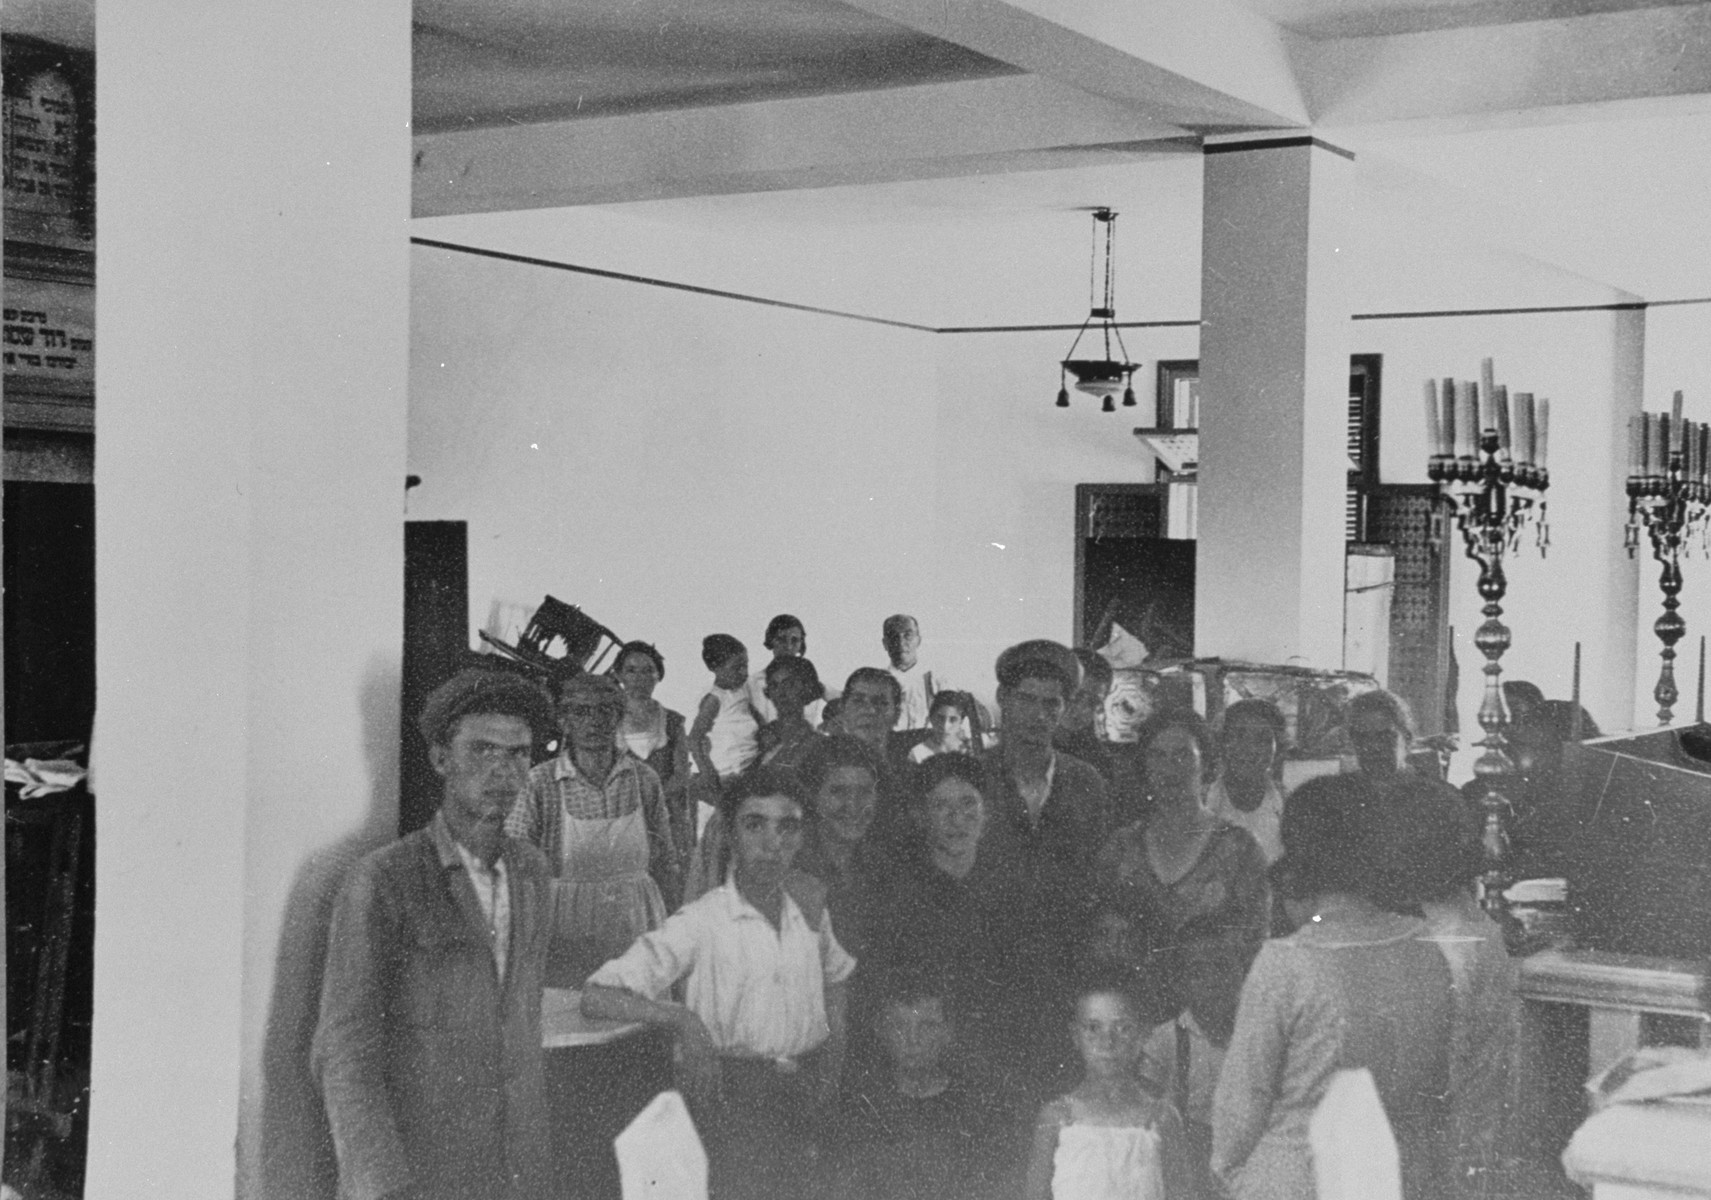 Jewish families take refuge in a  synagogue in Salonika after the pogrom at Camp Campbell.